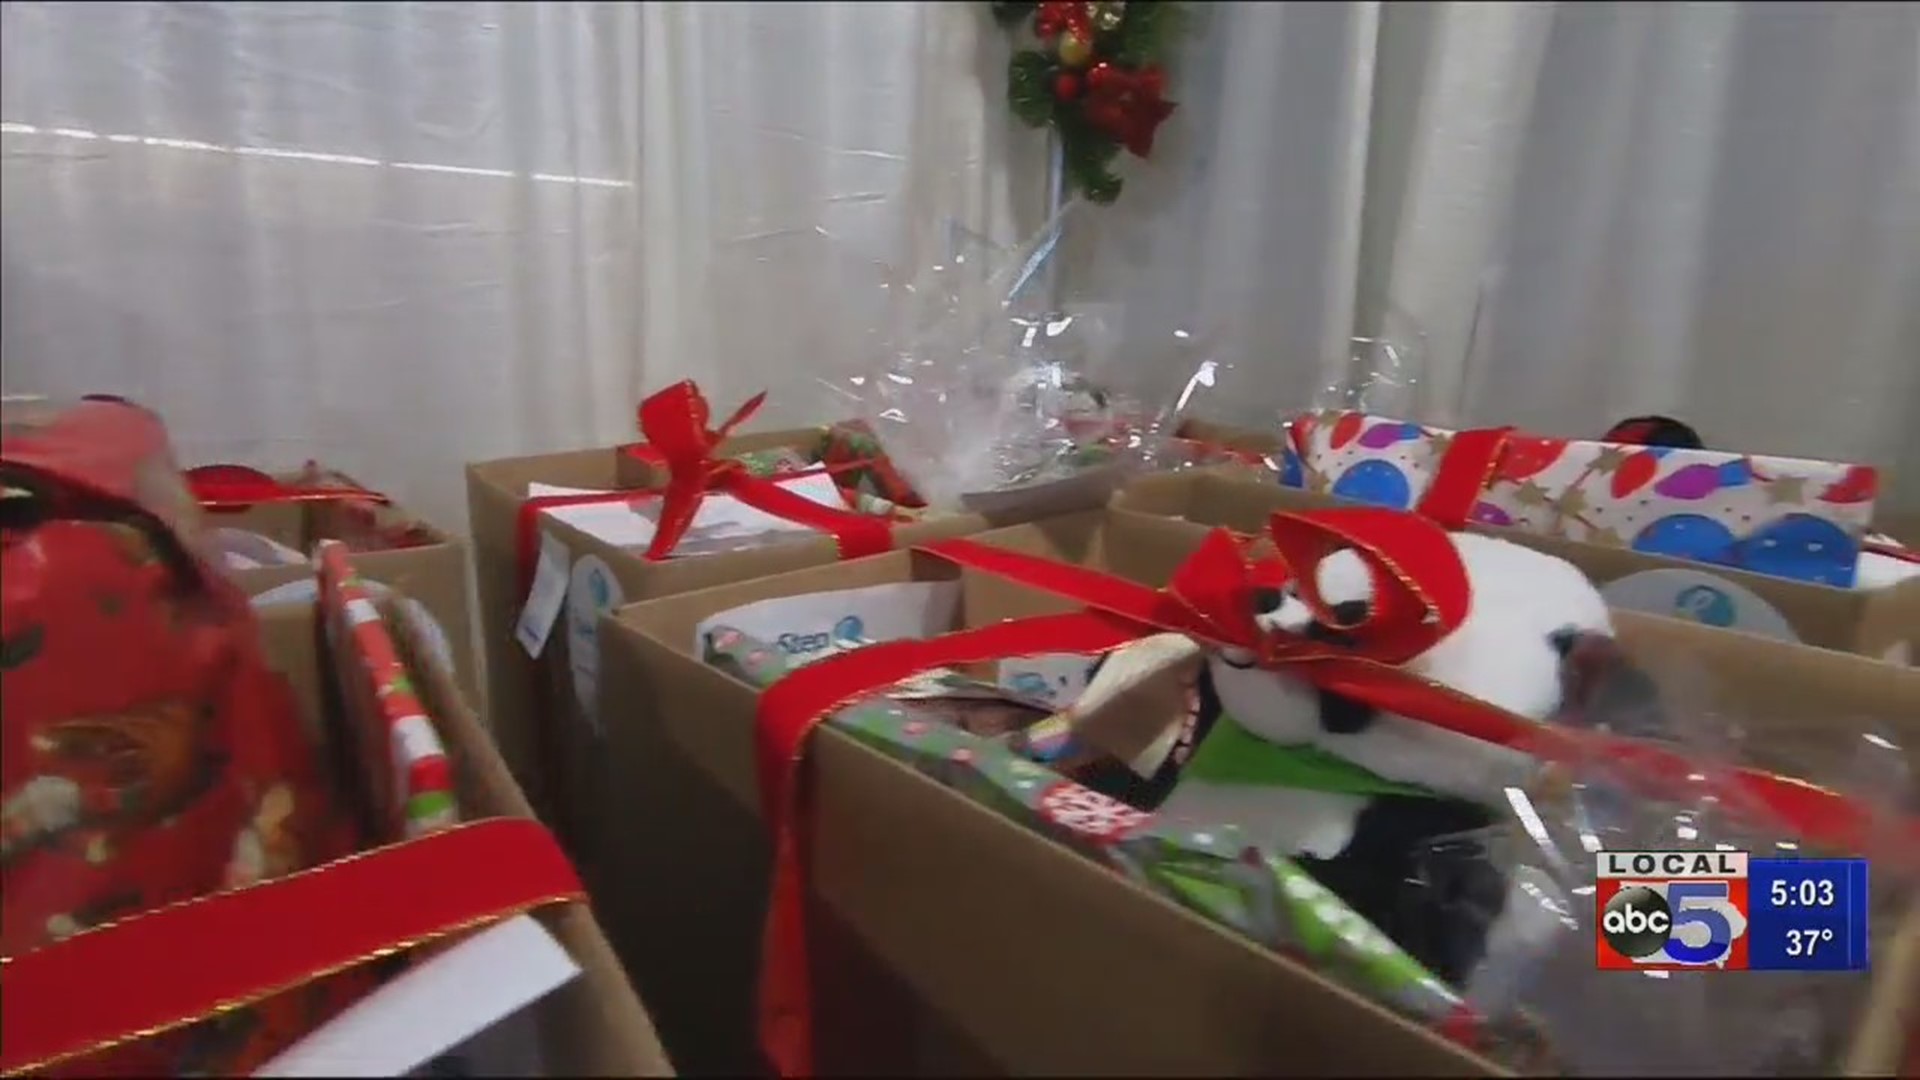 400 'cheer boxes' set to be delivered to grieving families